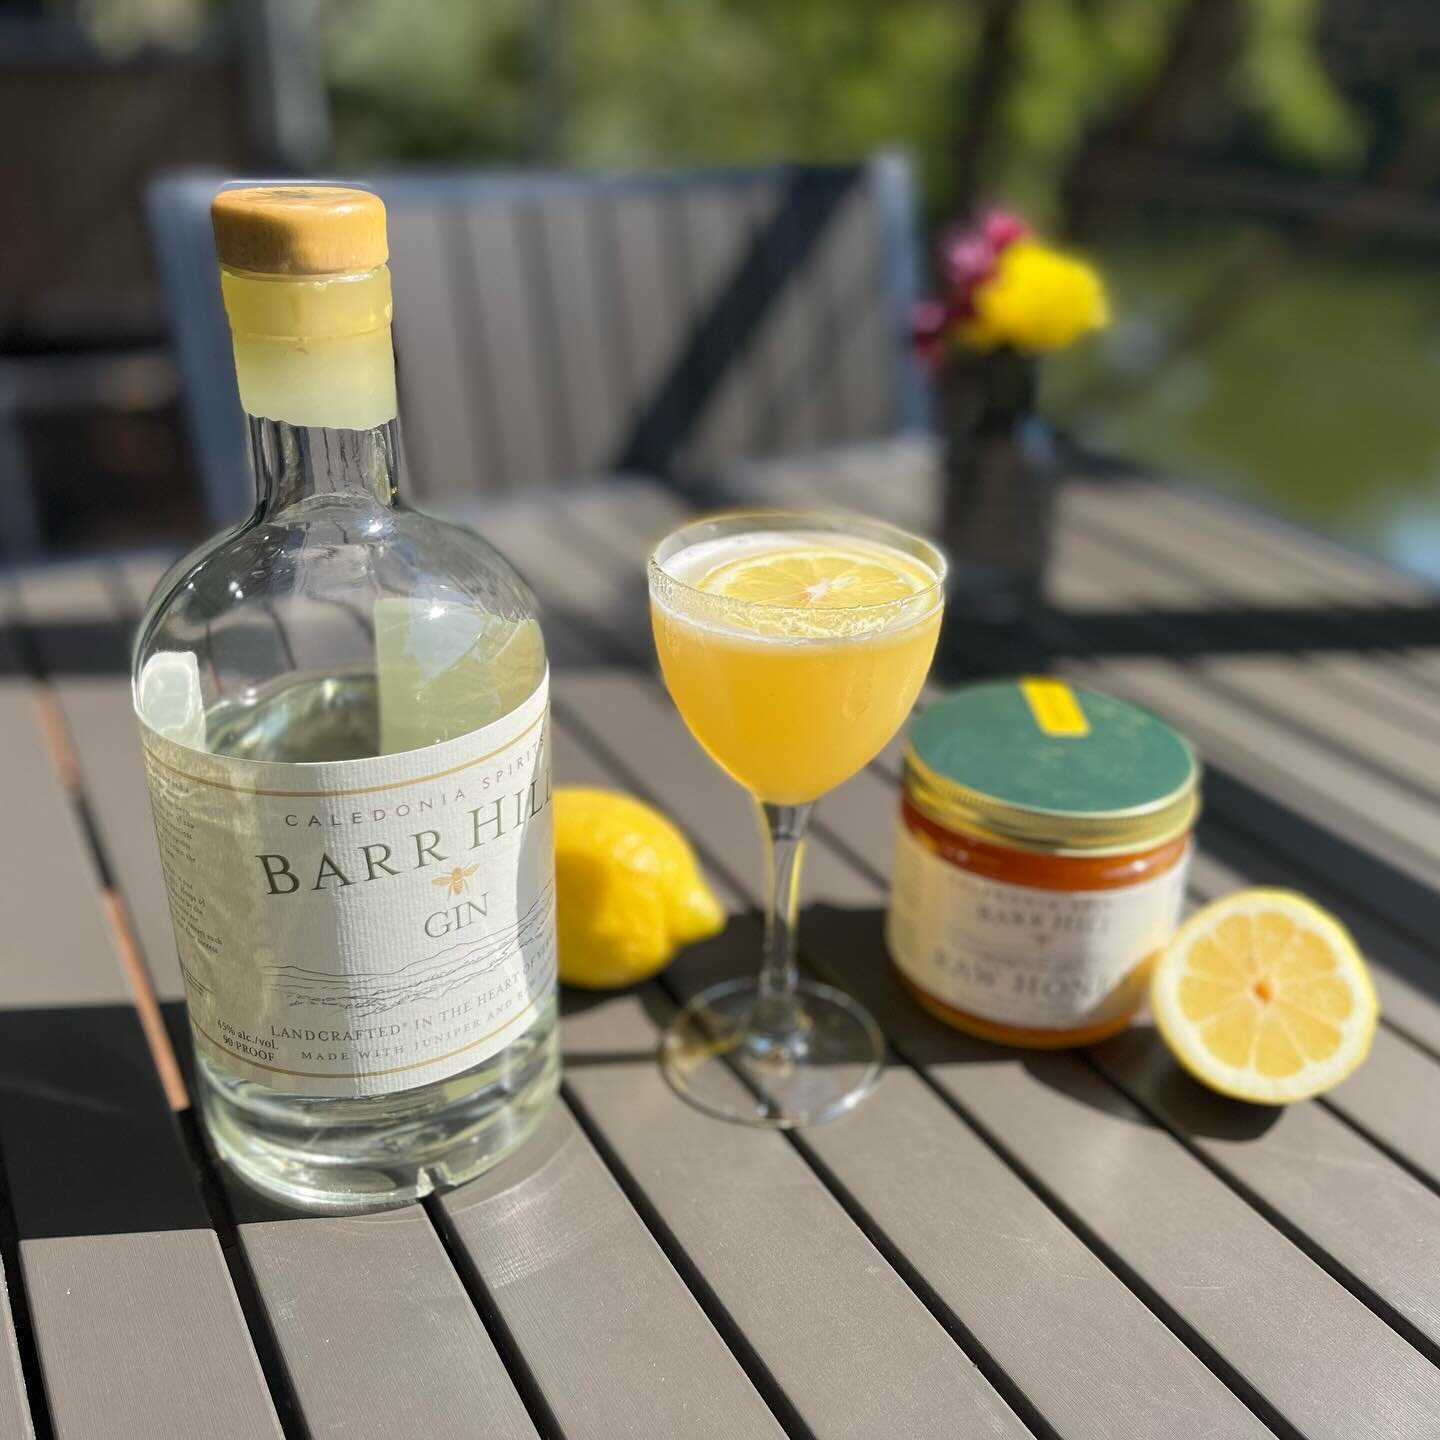 Join us for Bee's Knees Week - where the golden rays of sunshine will be poured into our glasses! 

From September 22 to October 1, we invite you to indulge in the refreshing flavors of a Barr Hill Bee's Knees cocktail, all while contributing to the 